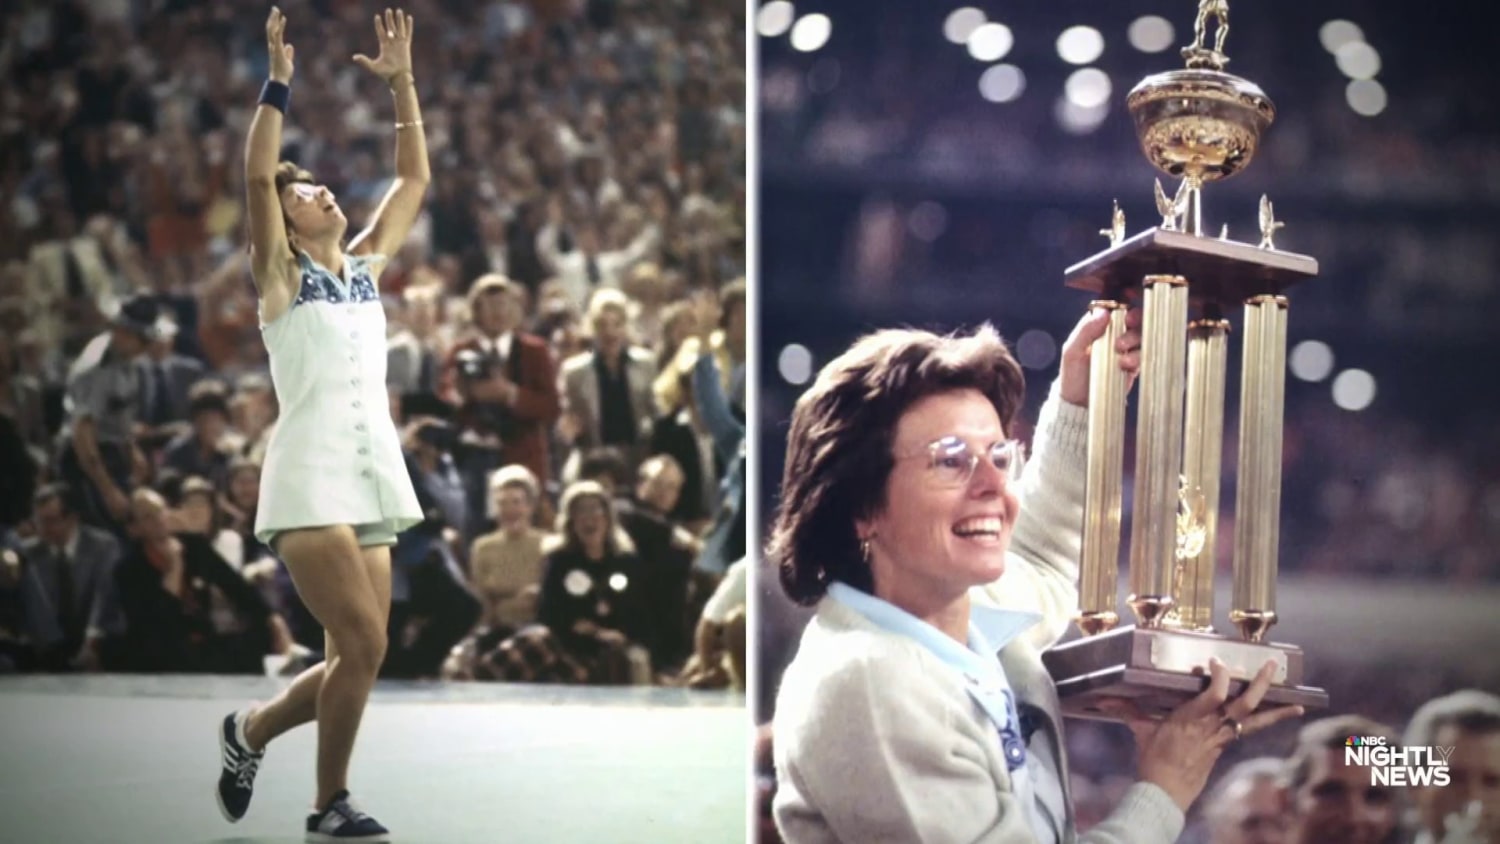 Billie Jean King: The Battle of the Sexes - documentary on match vs Bobby  Riggs, Tennis News